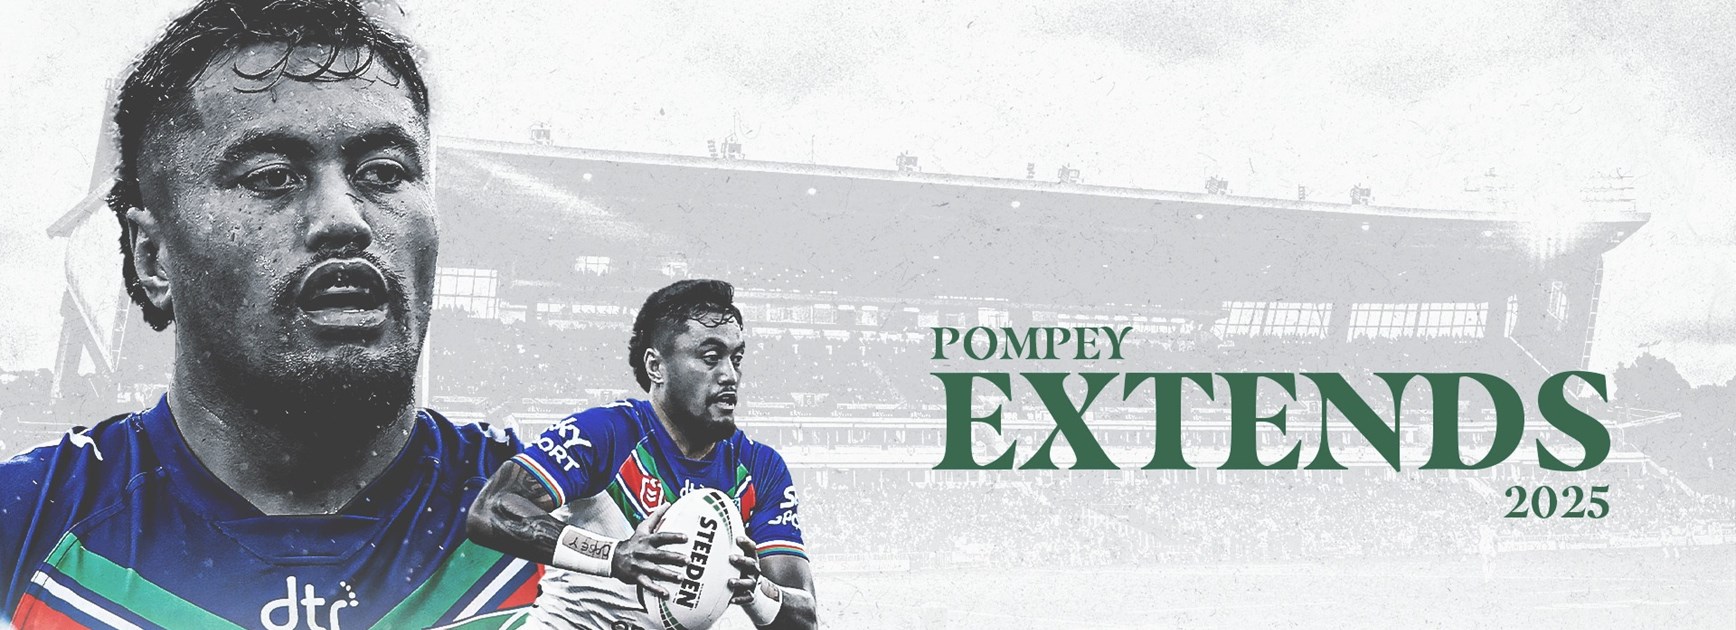 Pompey re-signed through to end of 2025 season